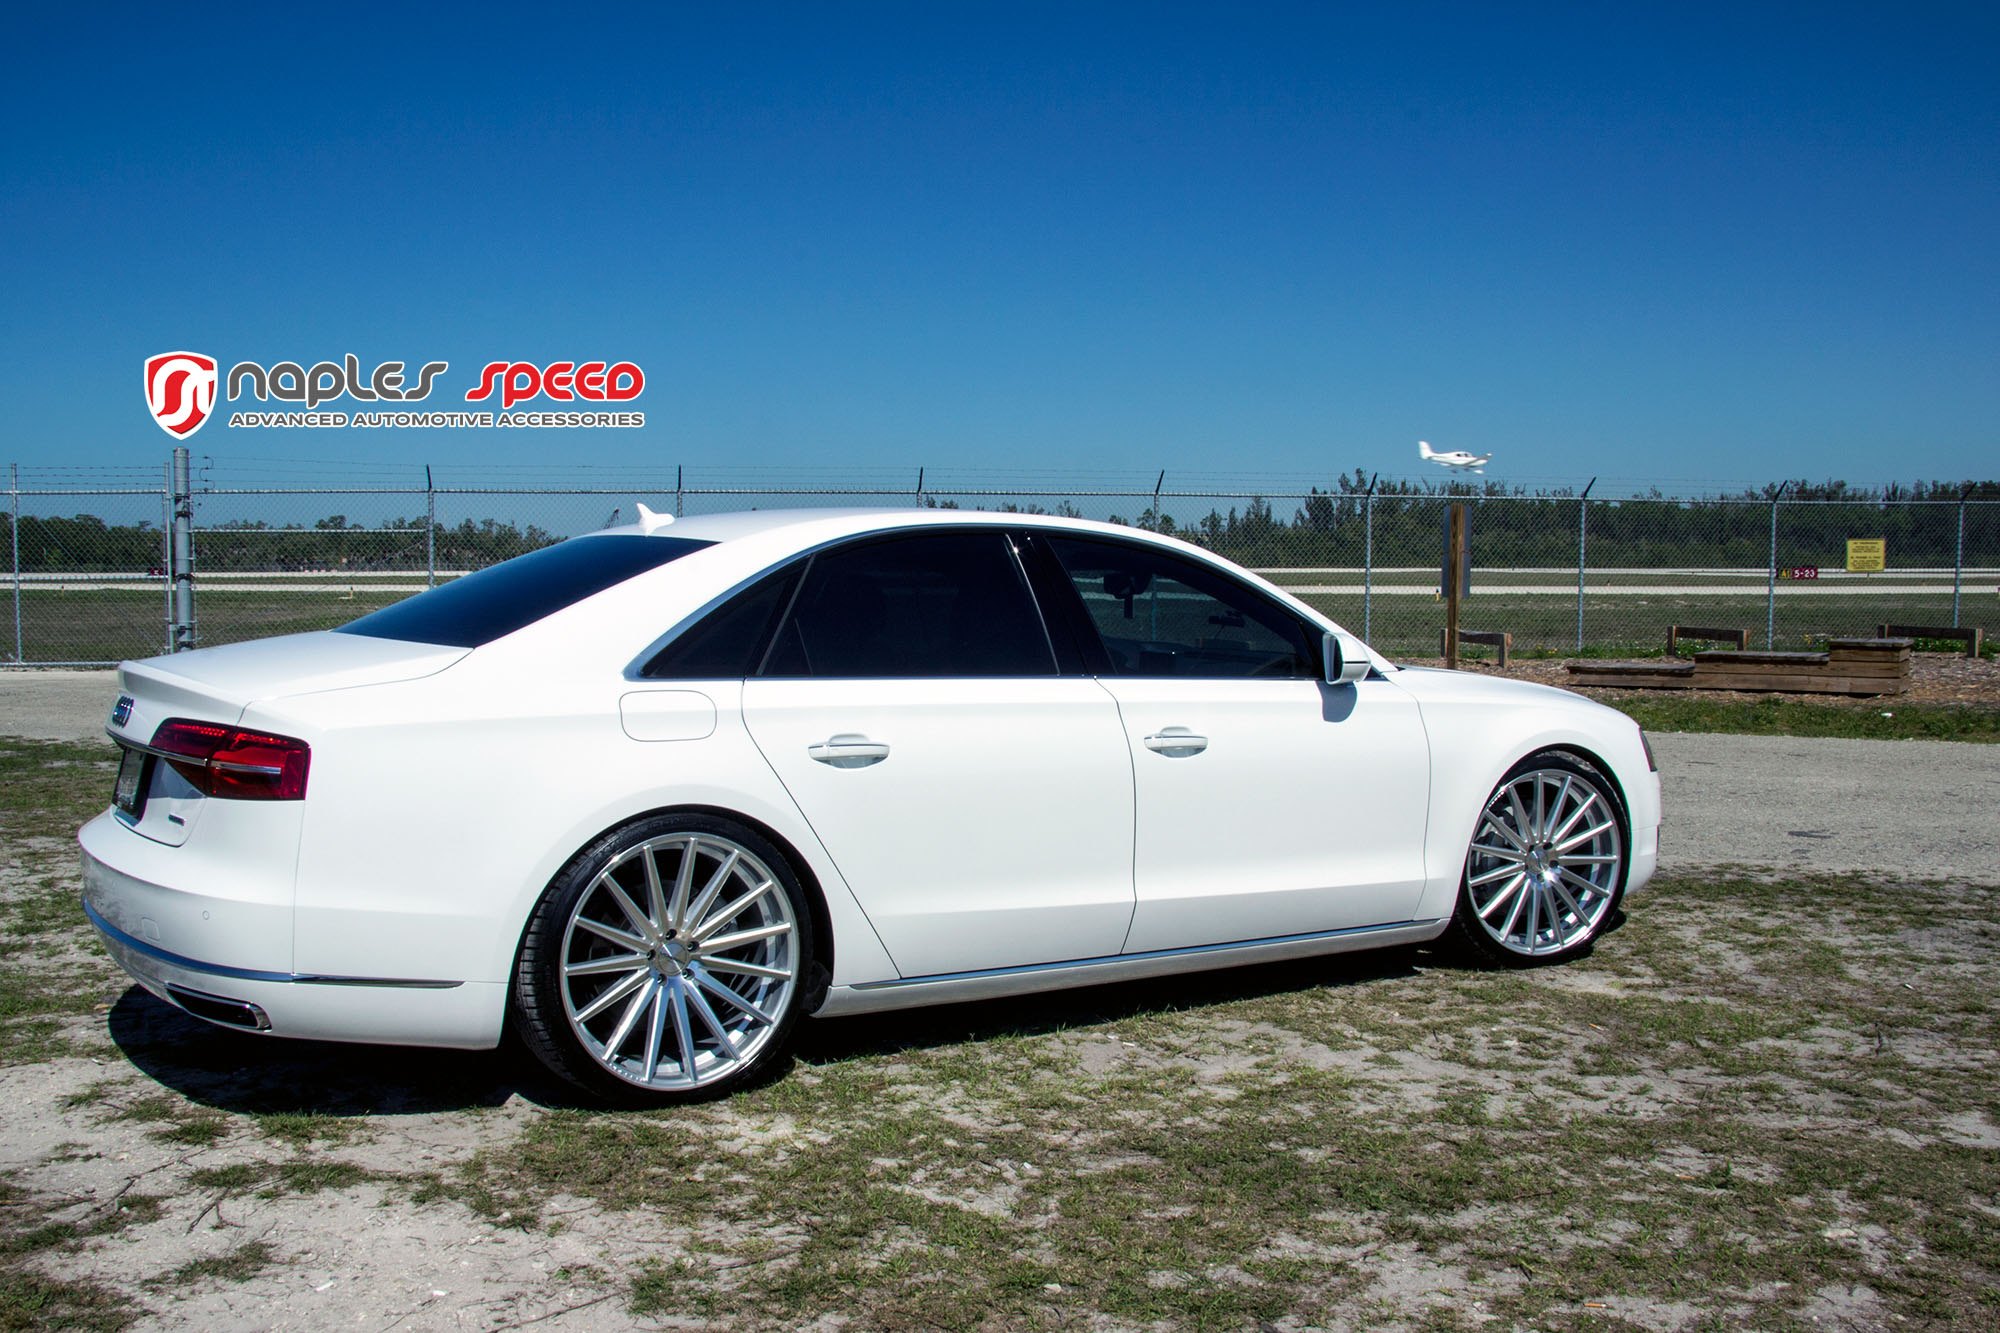 Aftermarket Rear Bumper Cover on Audi A8 - Photo by Vossen